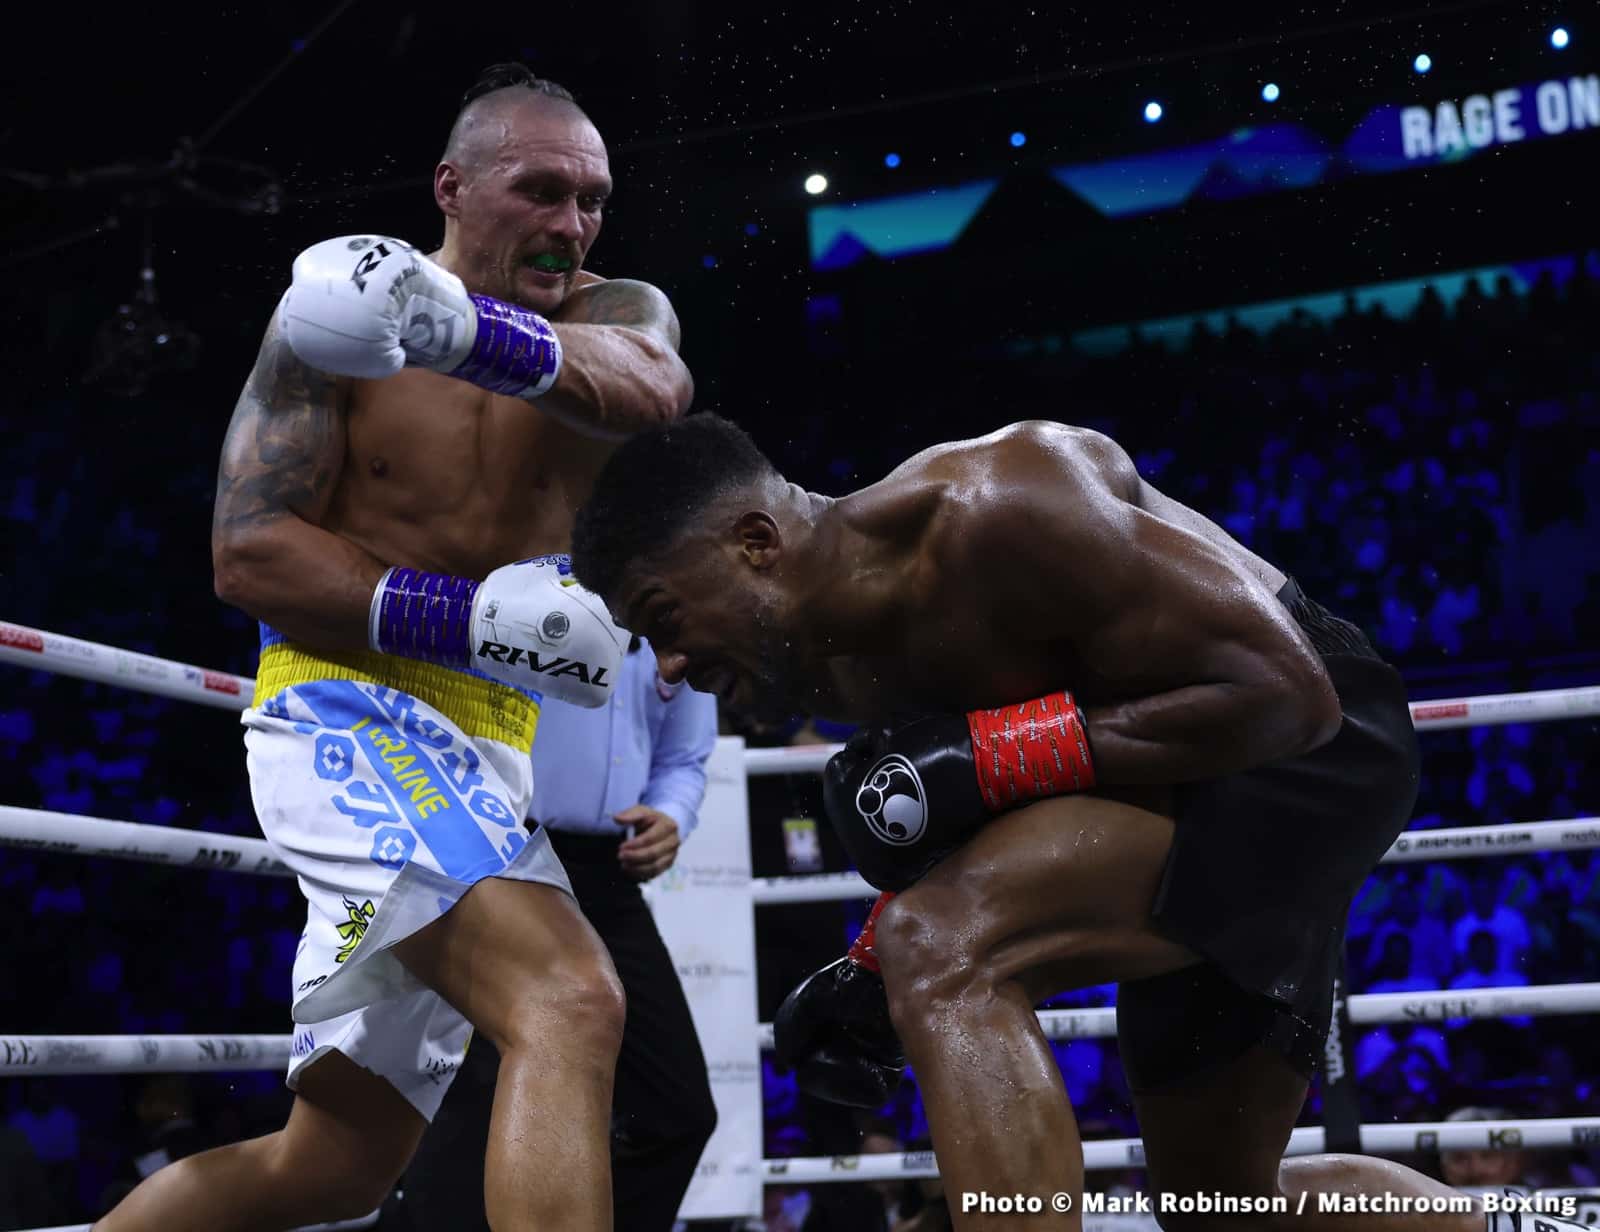 Alexander Usyk, Deontay Wilder boxing image / photo